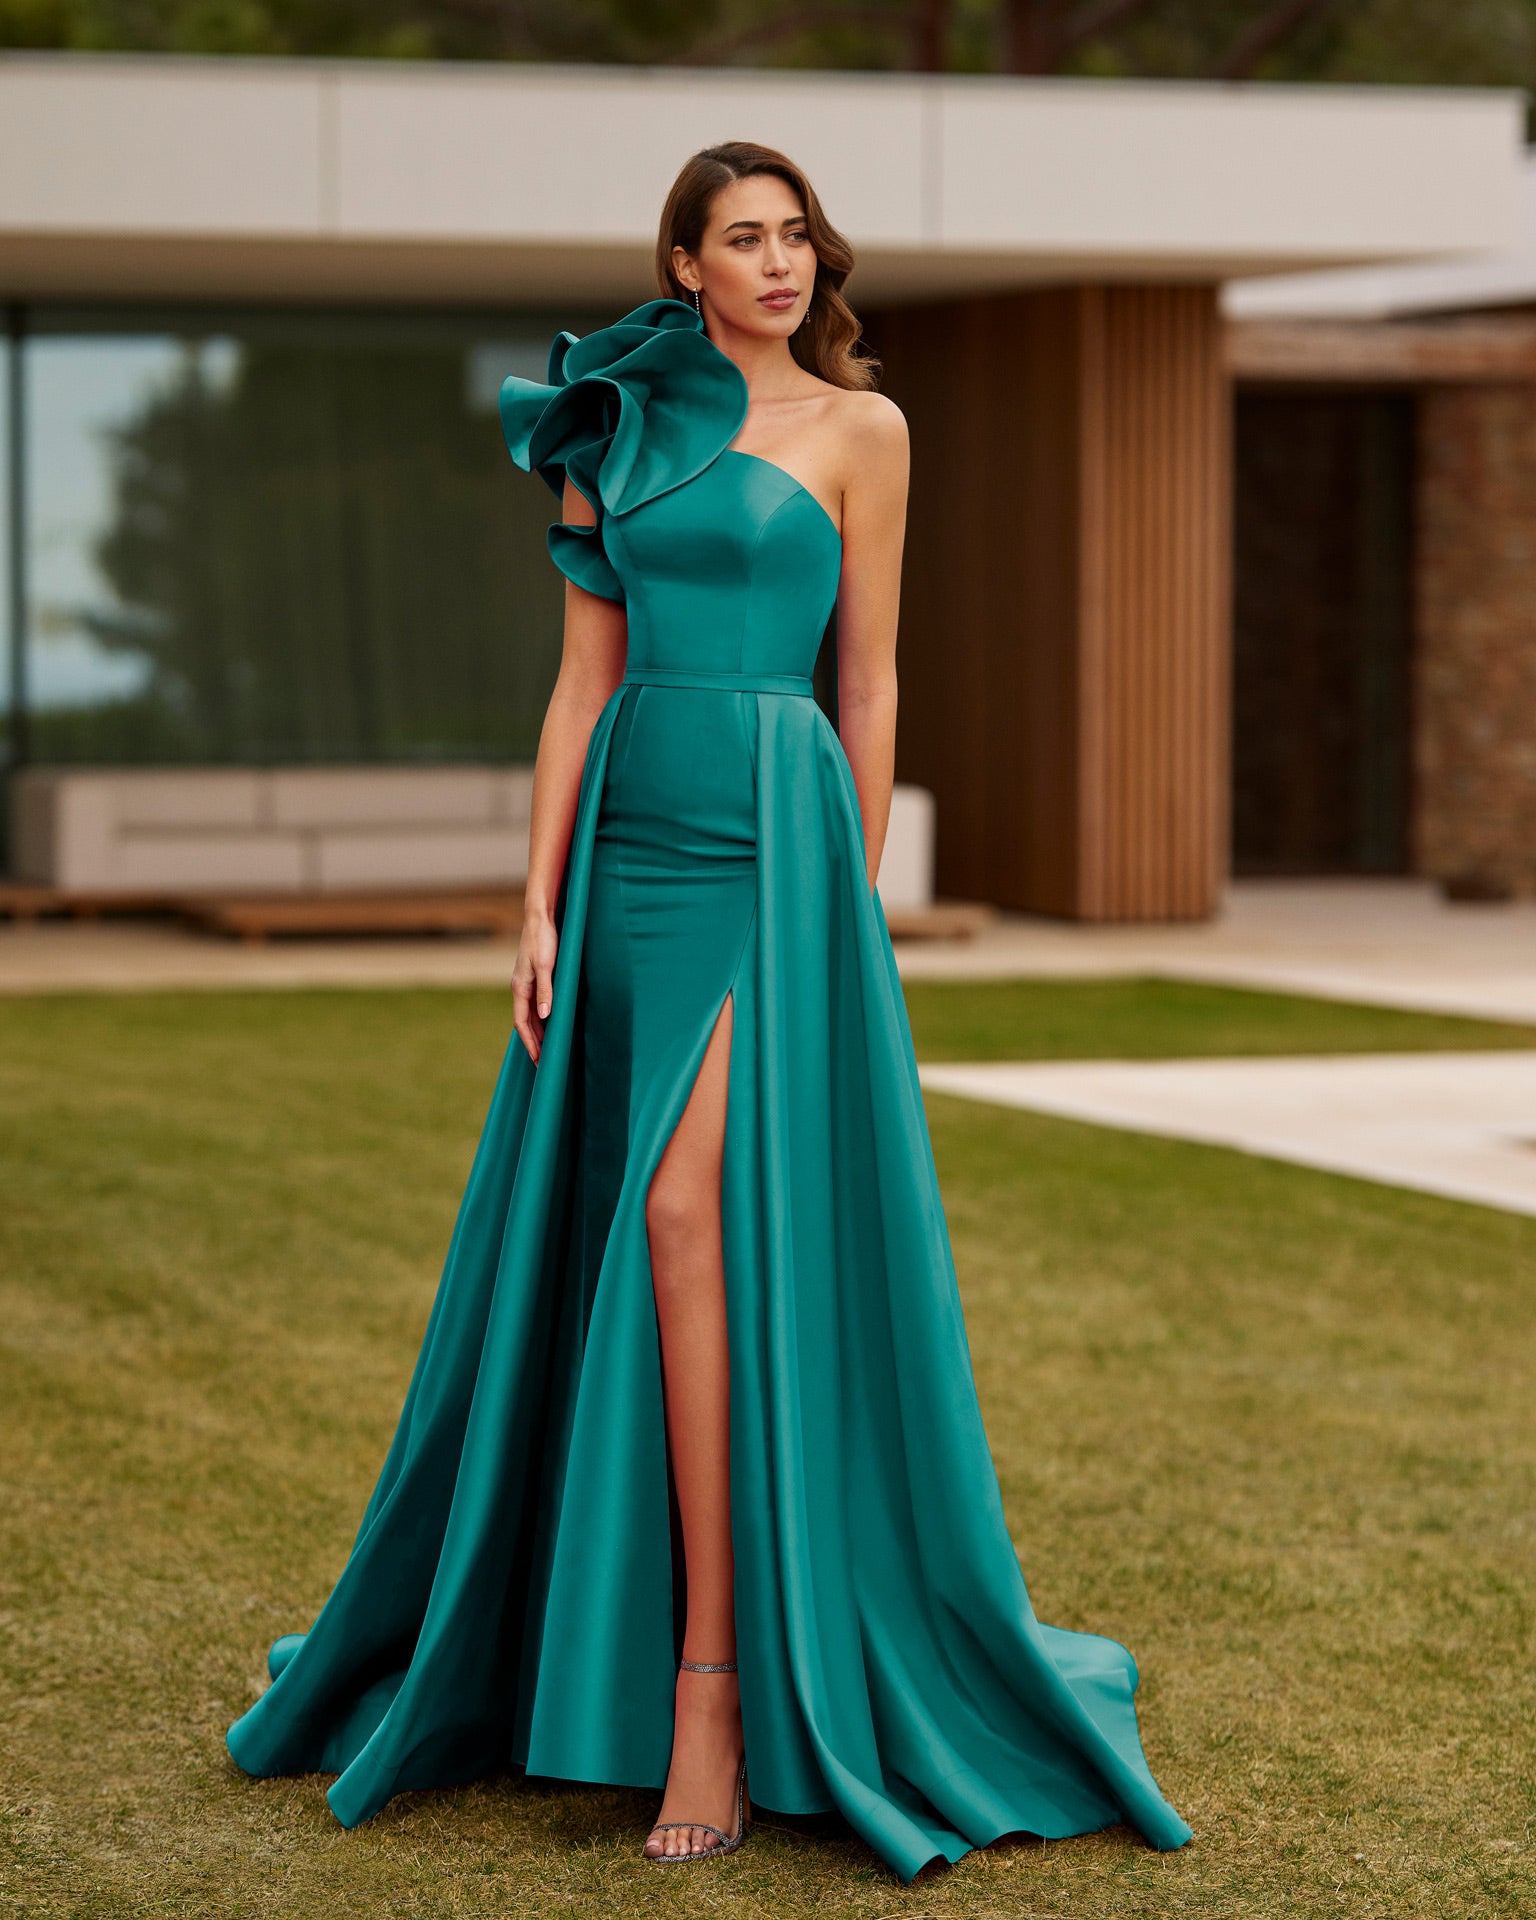 Teal mother of the bride and Groom gown